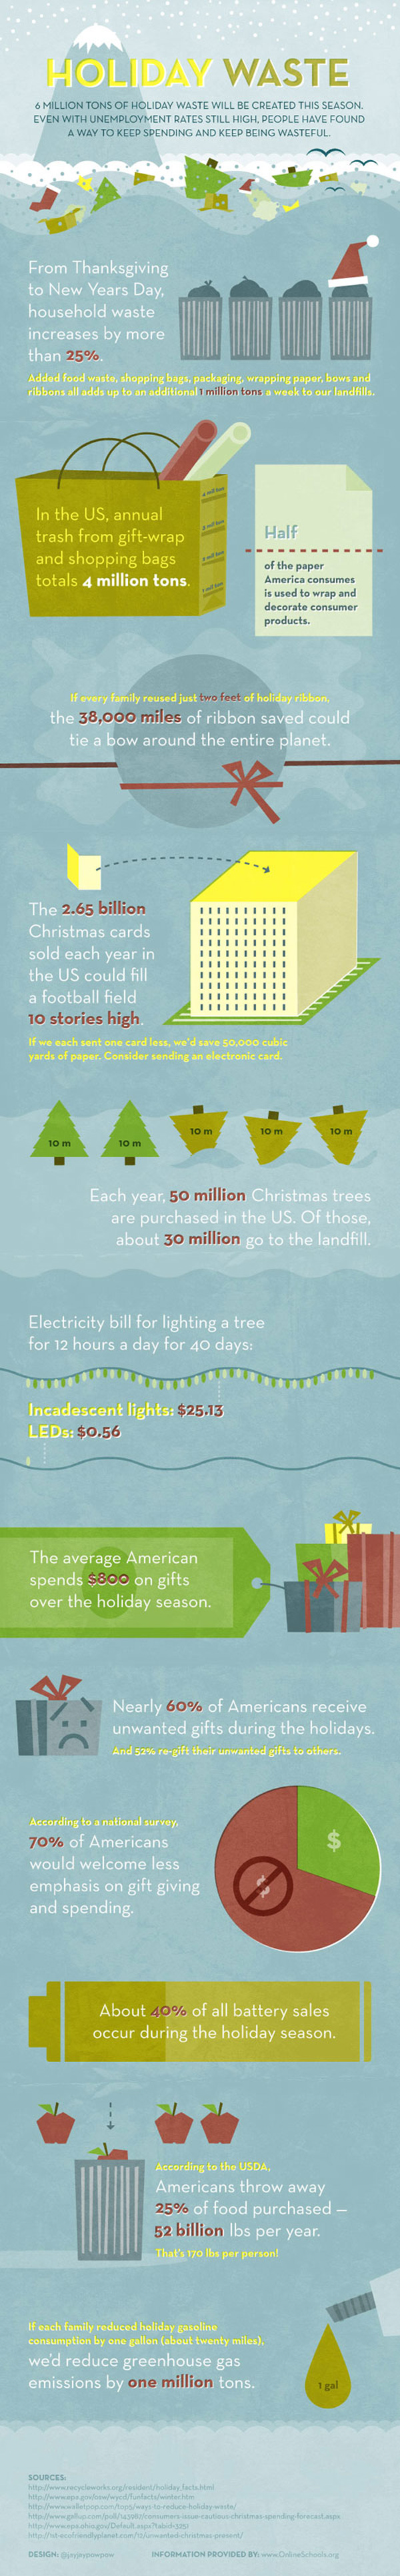 holiday-waste-infographic600